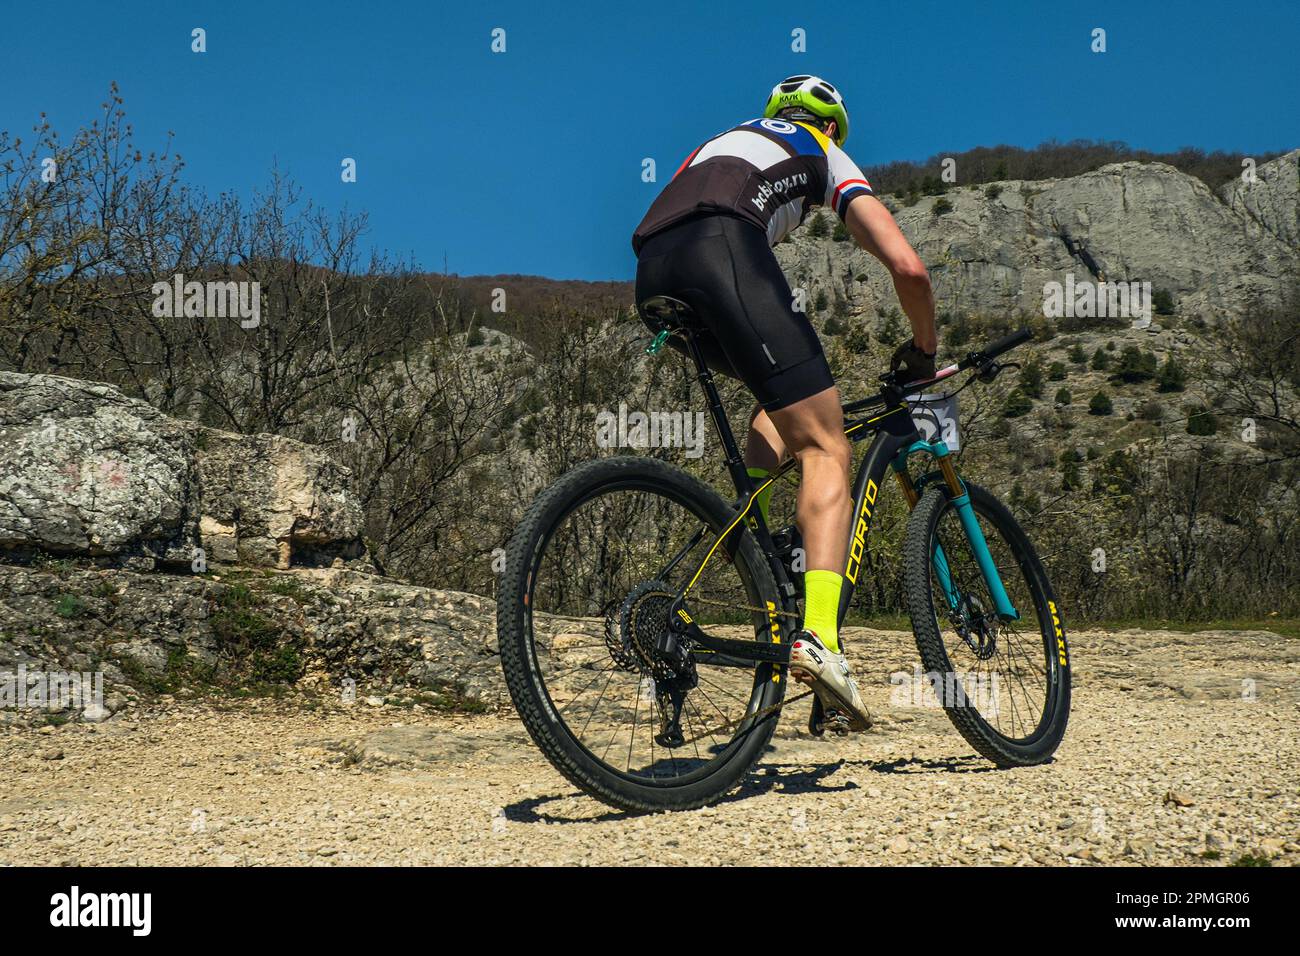 Yalta, Russia - May 2, 2021: cyclist riding mountain bike uphill cross-country cycling. Corto bikes, Maxxis tires, Sidi road shoes, Kask helmet Stock Photo